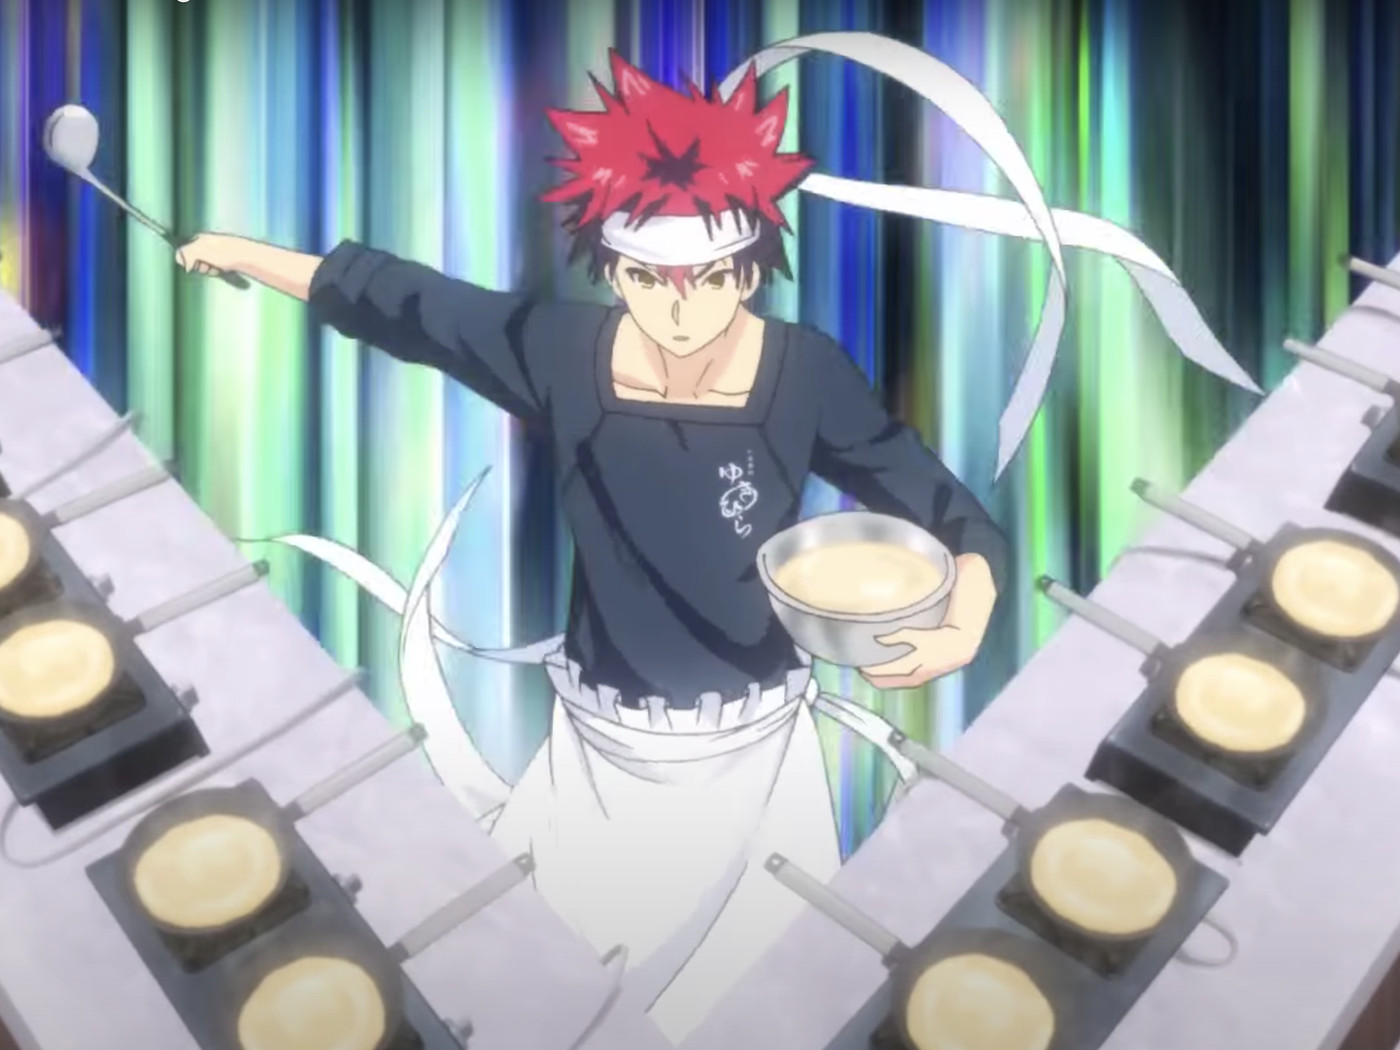 The Foodgasms in Food Wars Is the Best Depiction of Good Eating. 